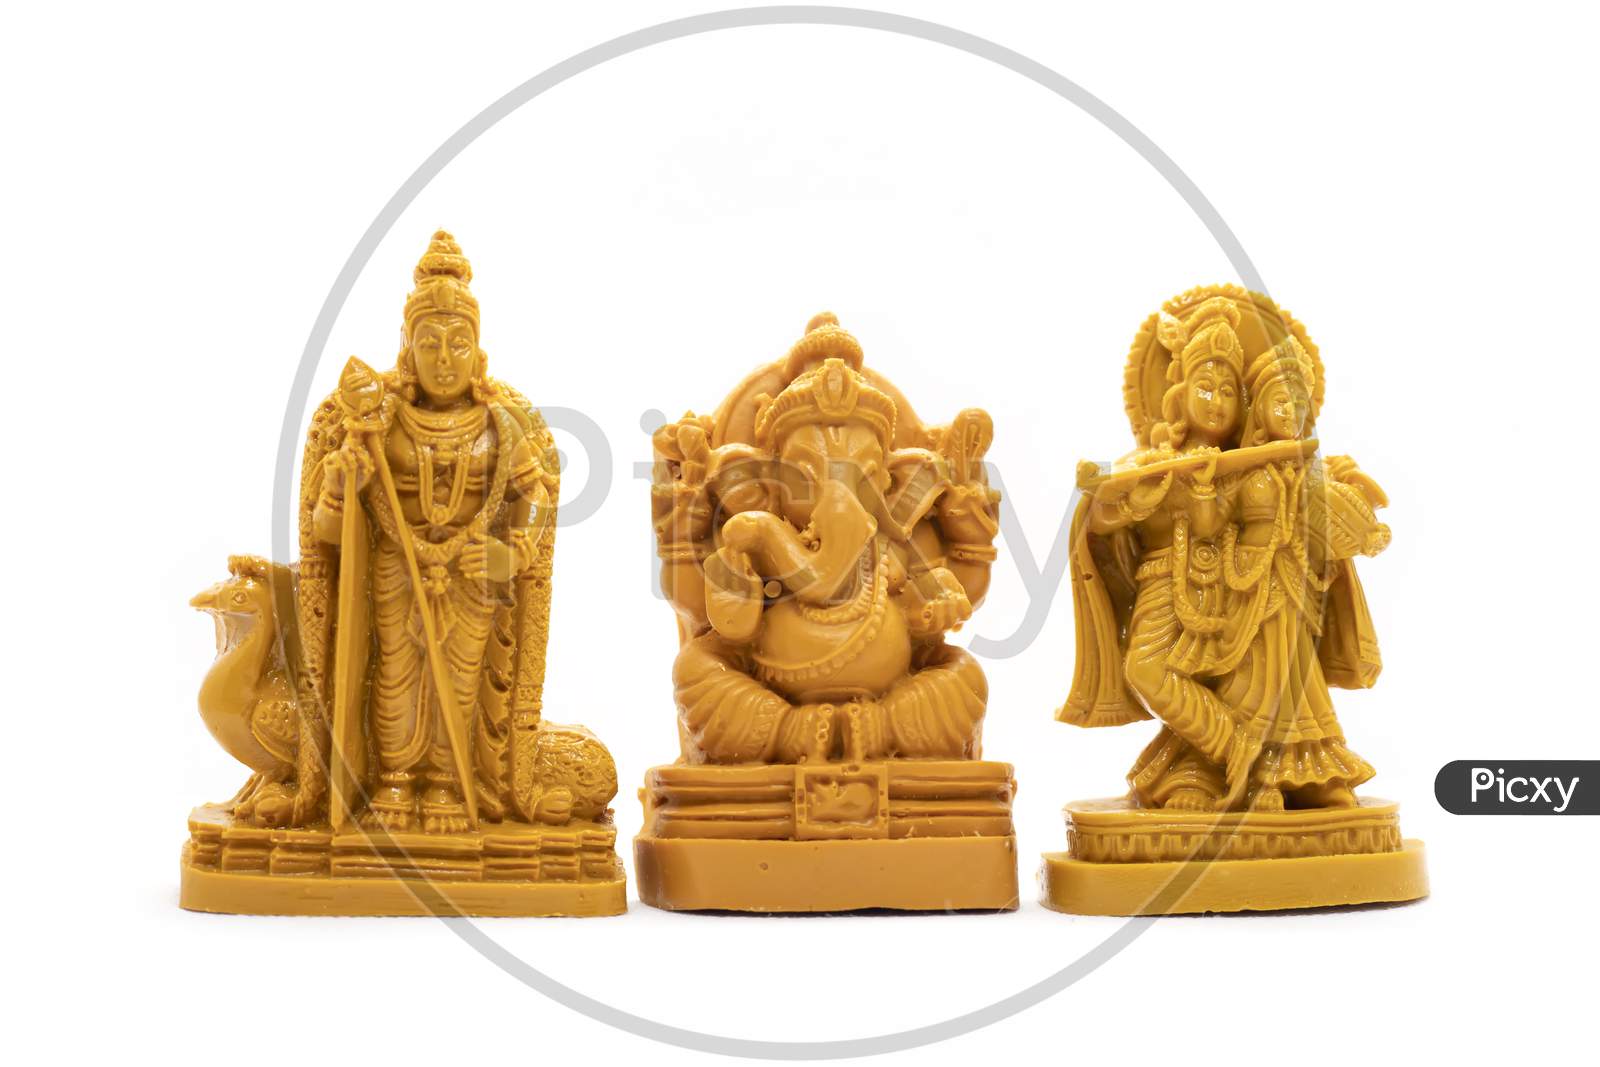 The Hand-Carved Wooden Idol Of Lord Murugan With Radha Krishna And Ganesha Is Isolated On A White Background